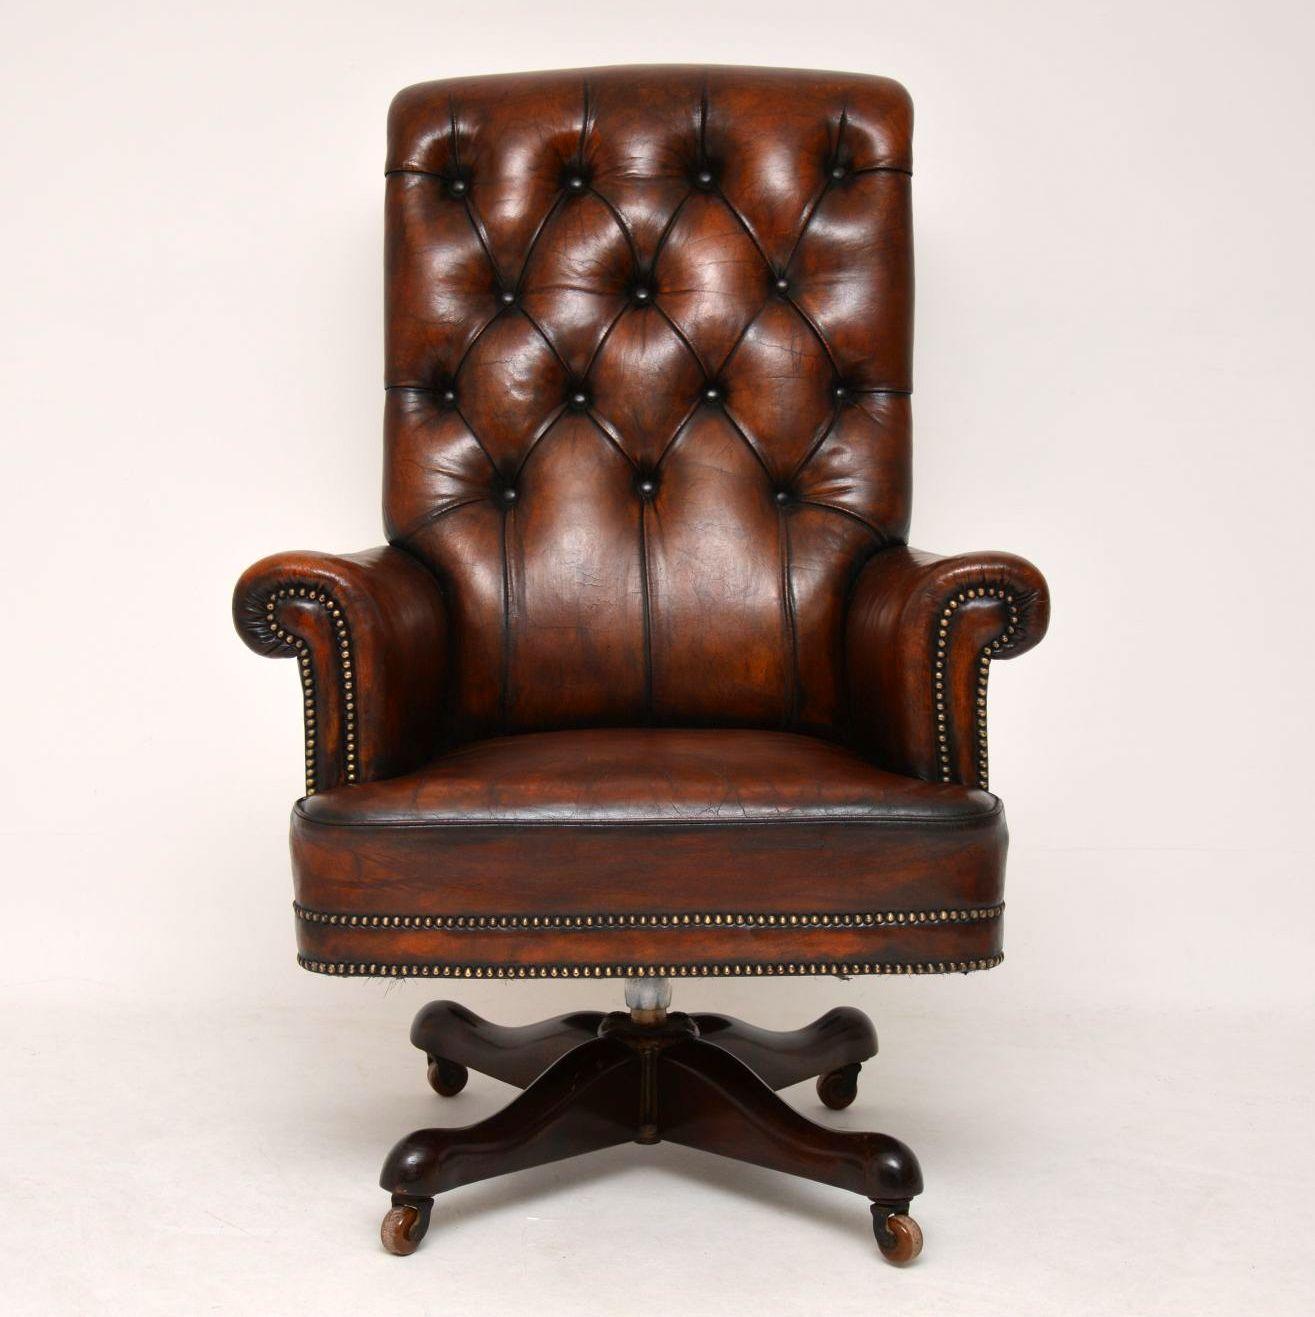 This antique deep buttoned leather swivel armchair is the Rolls Royce of desk chairs and is one of most comfortable chairs I’ve sat on. It’s so comfortable that it could just be used as an armchair without a desk. The height can be adjusted and it